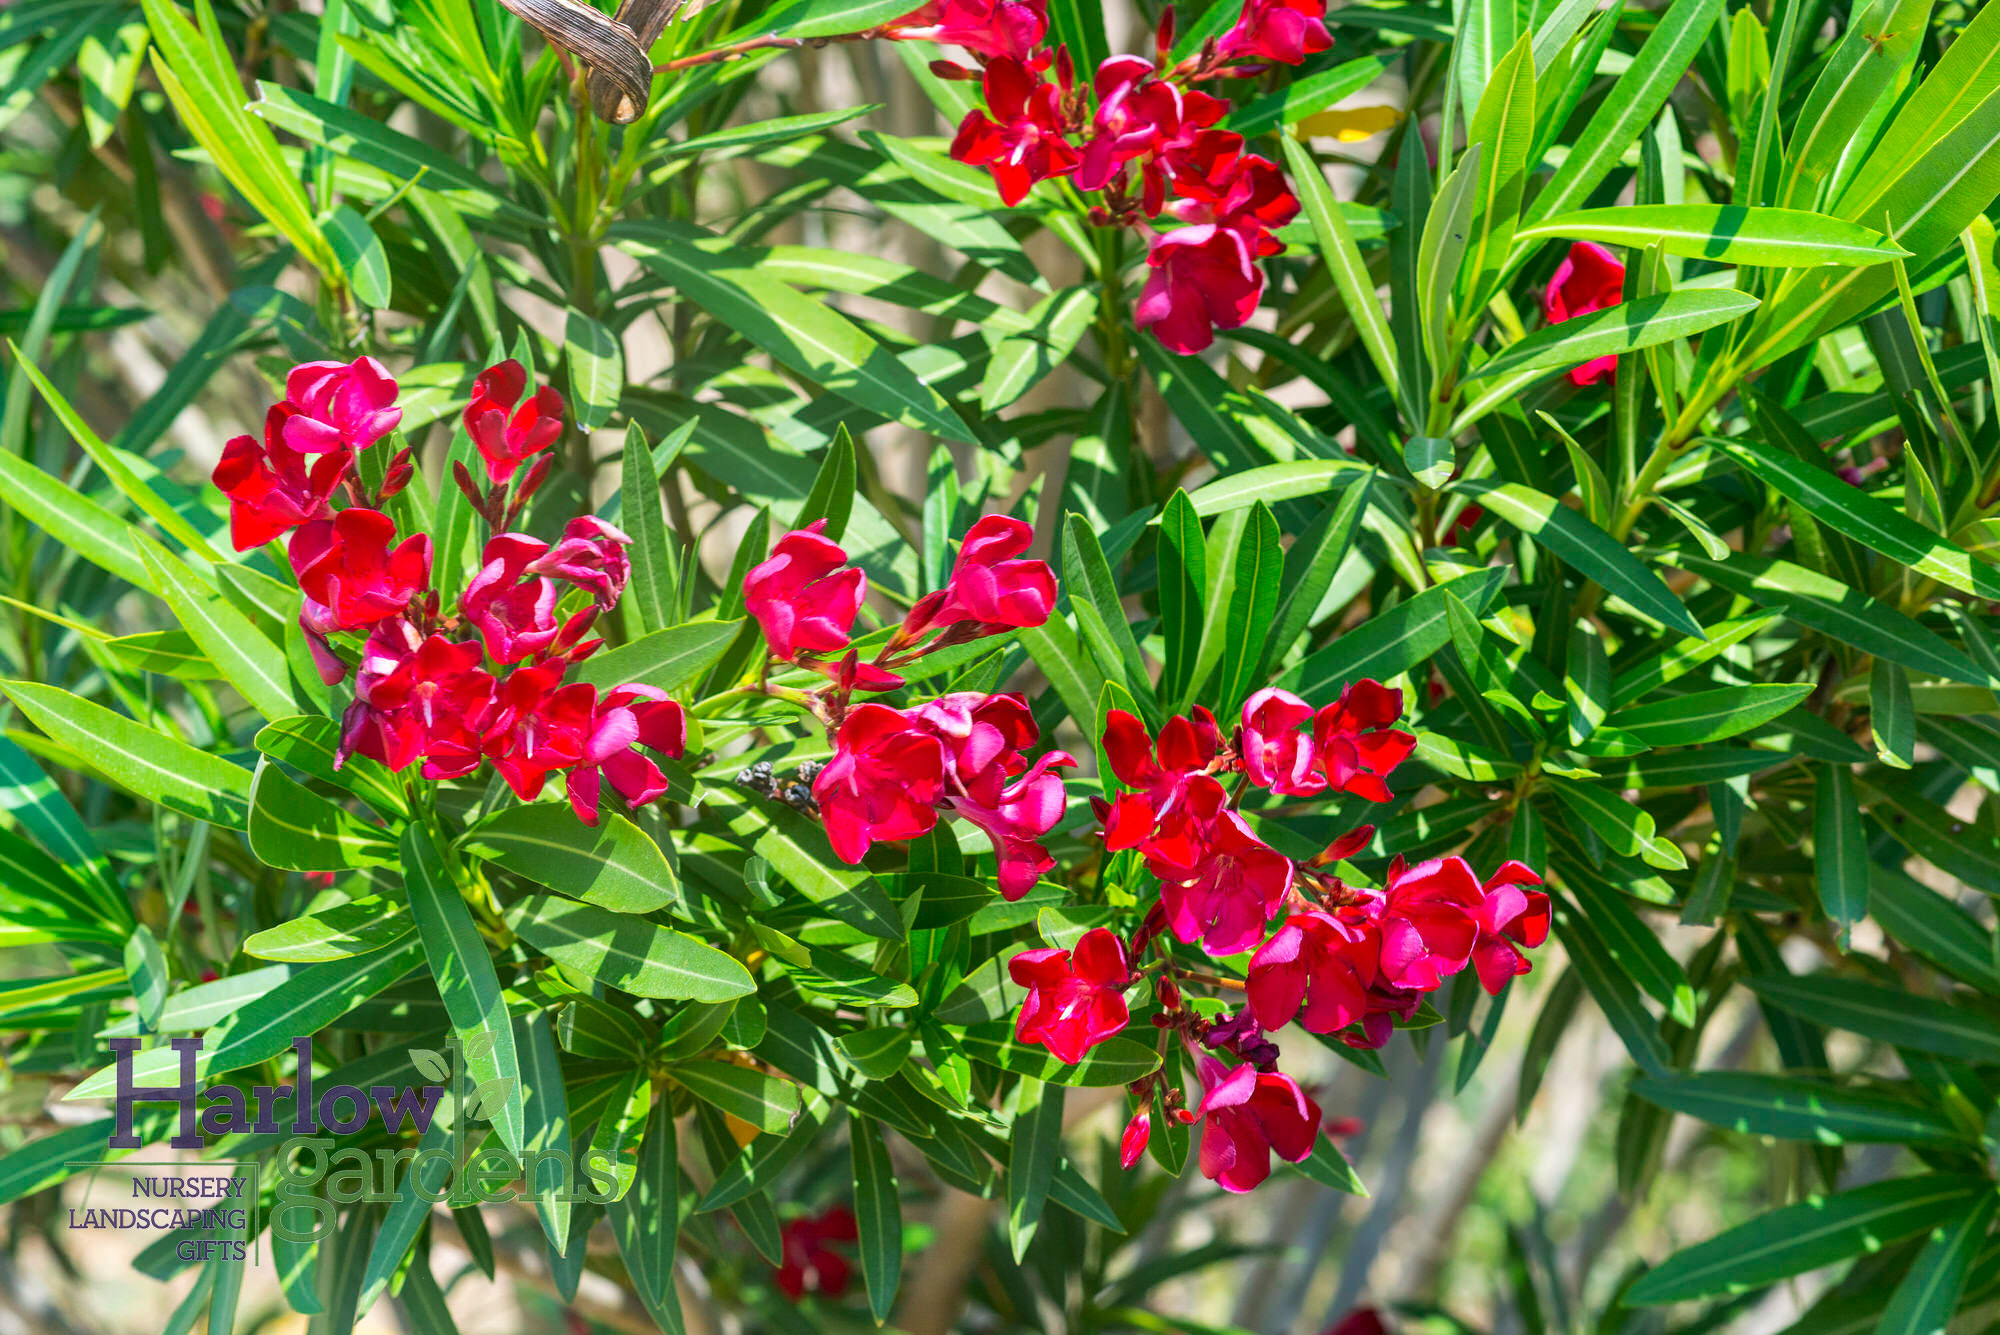 Red Common Oleander for sale at Harlow Gardens Tucson.